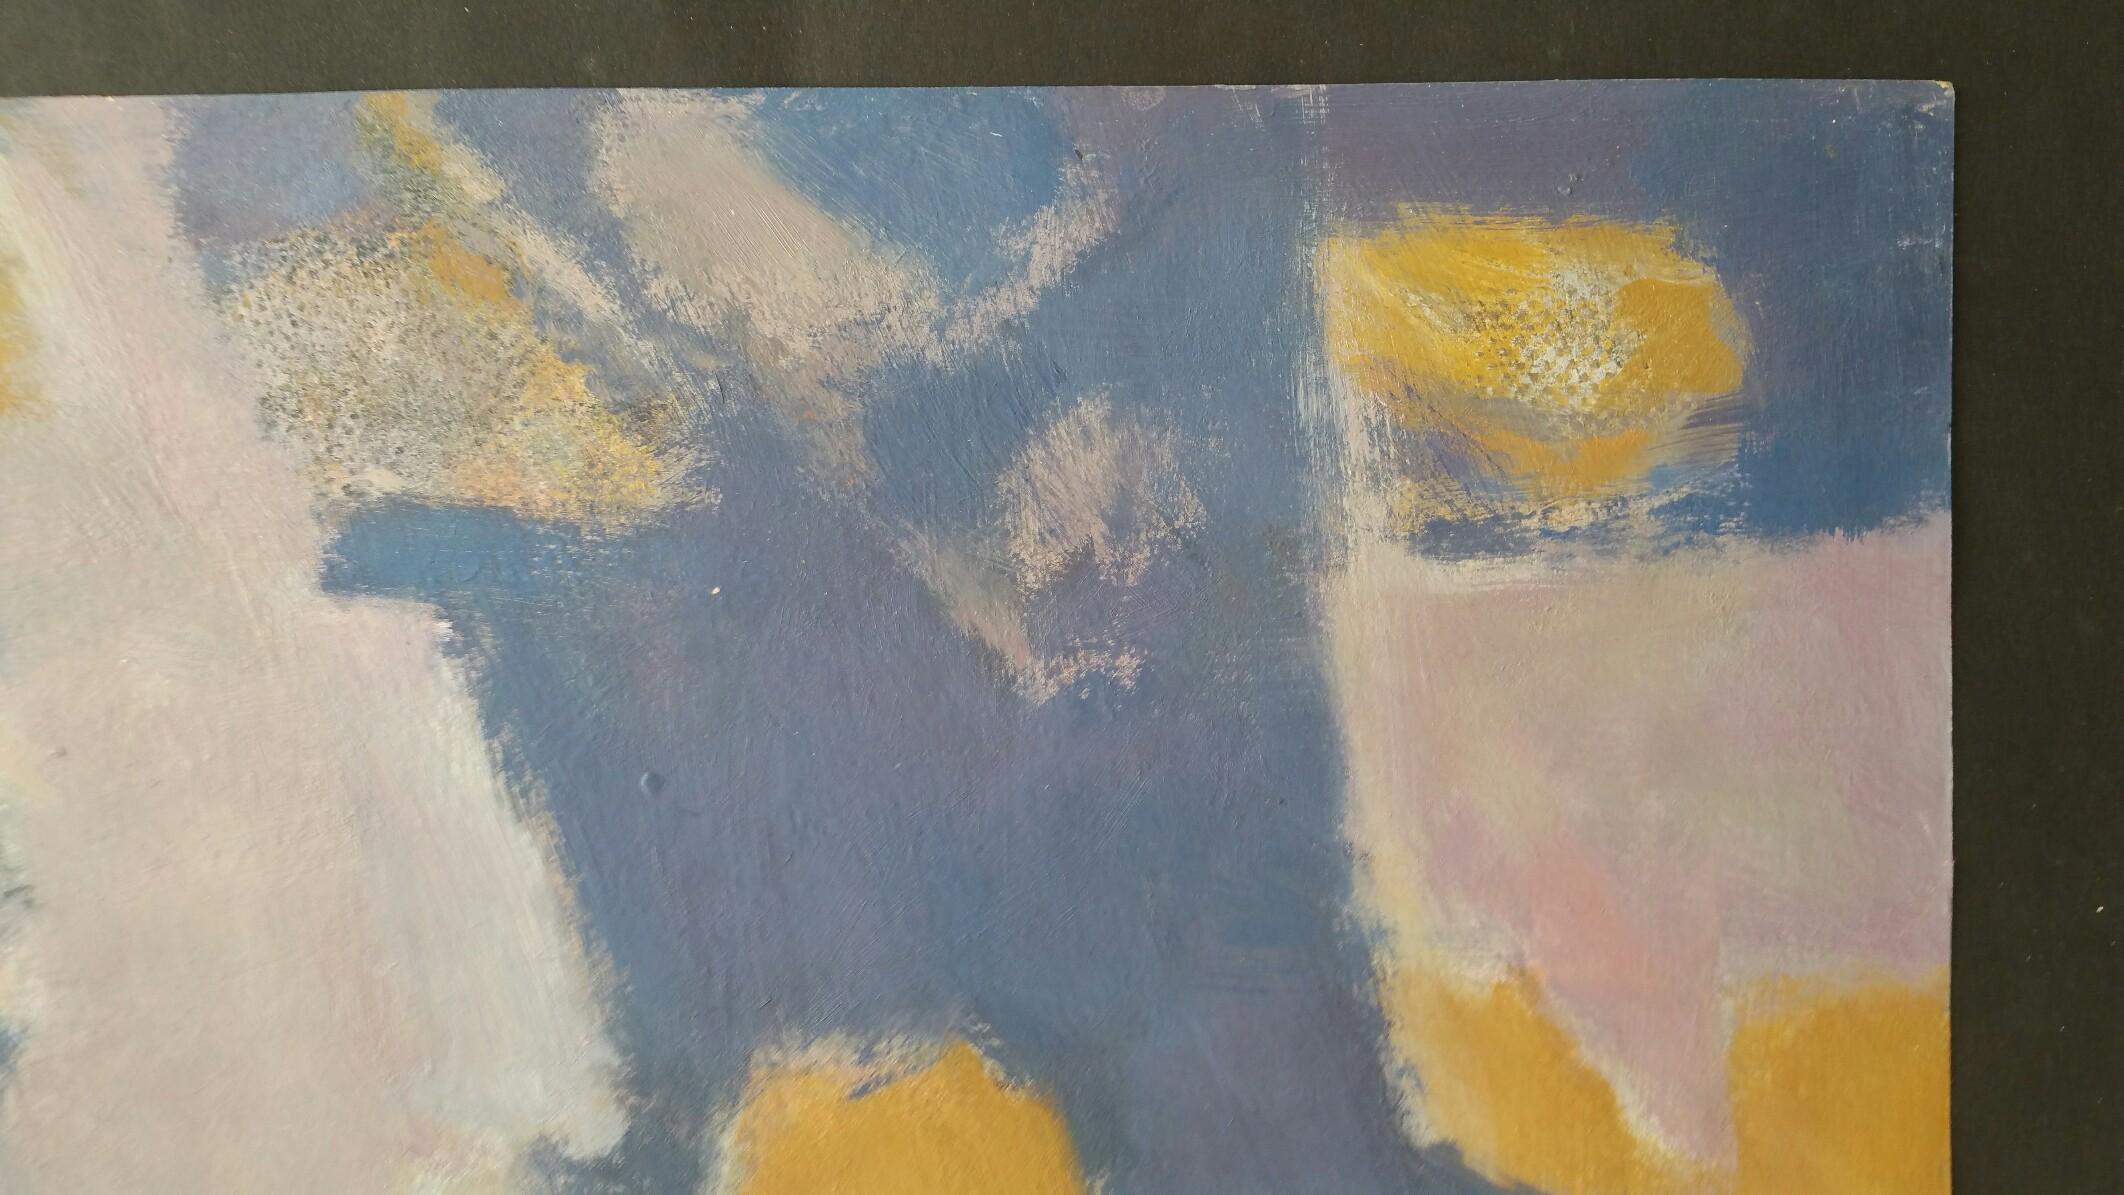 Stunning original oil painting by the French abstract artist, Yvette Dubois-Habasque (1929-2016). The painting has excellent provenance having come from the artists studio sale in Paris. We will provide a Certificate of Authenticity with the